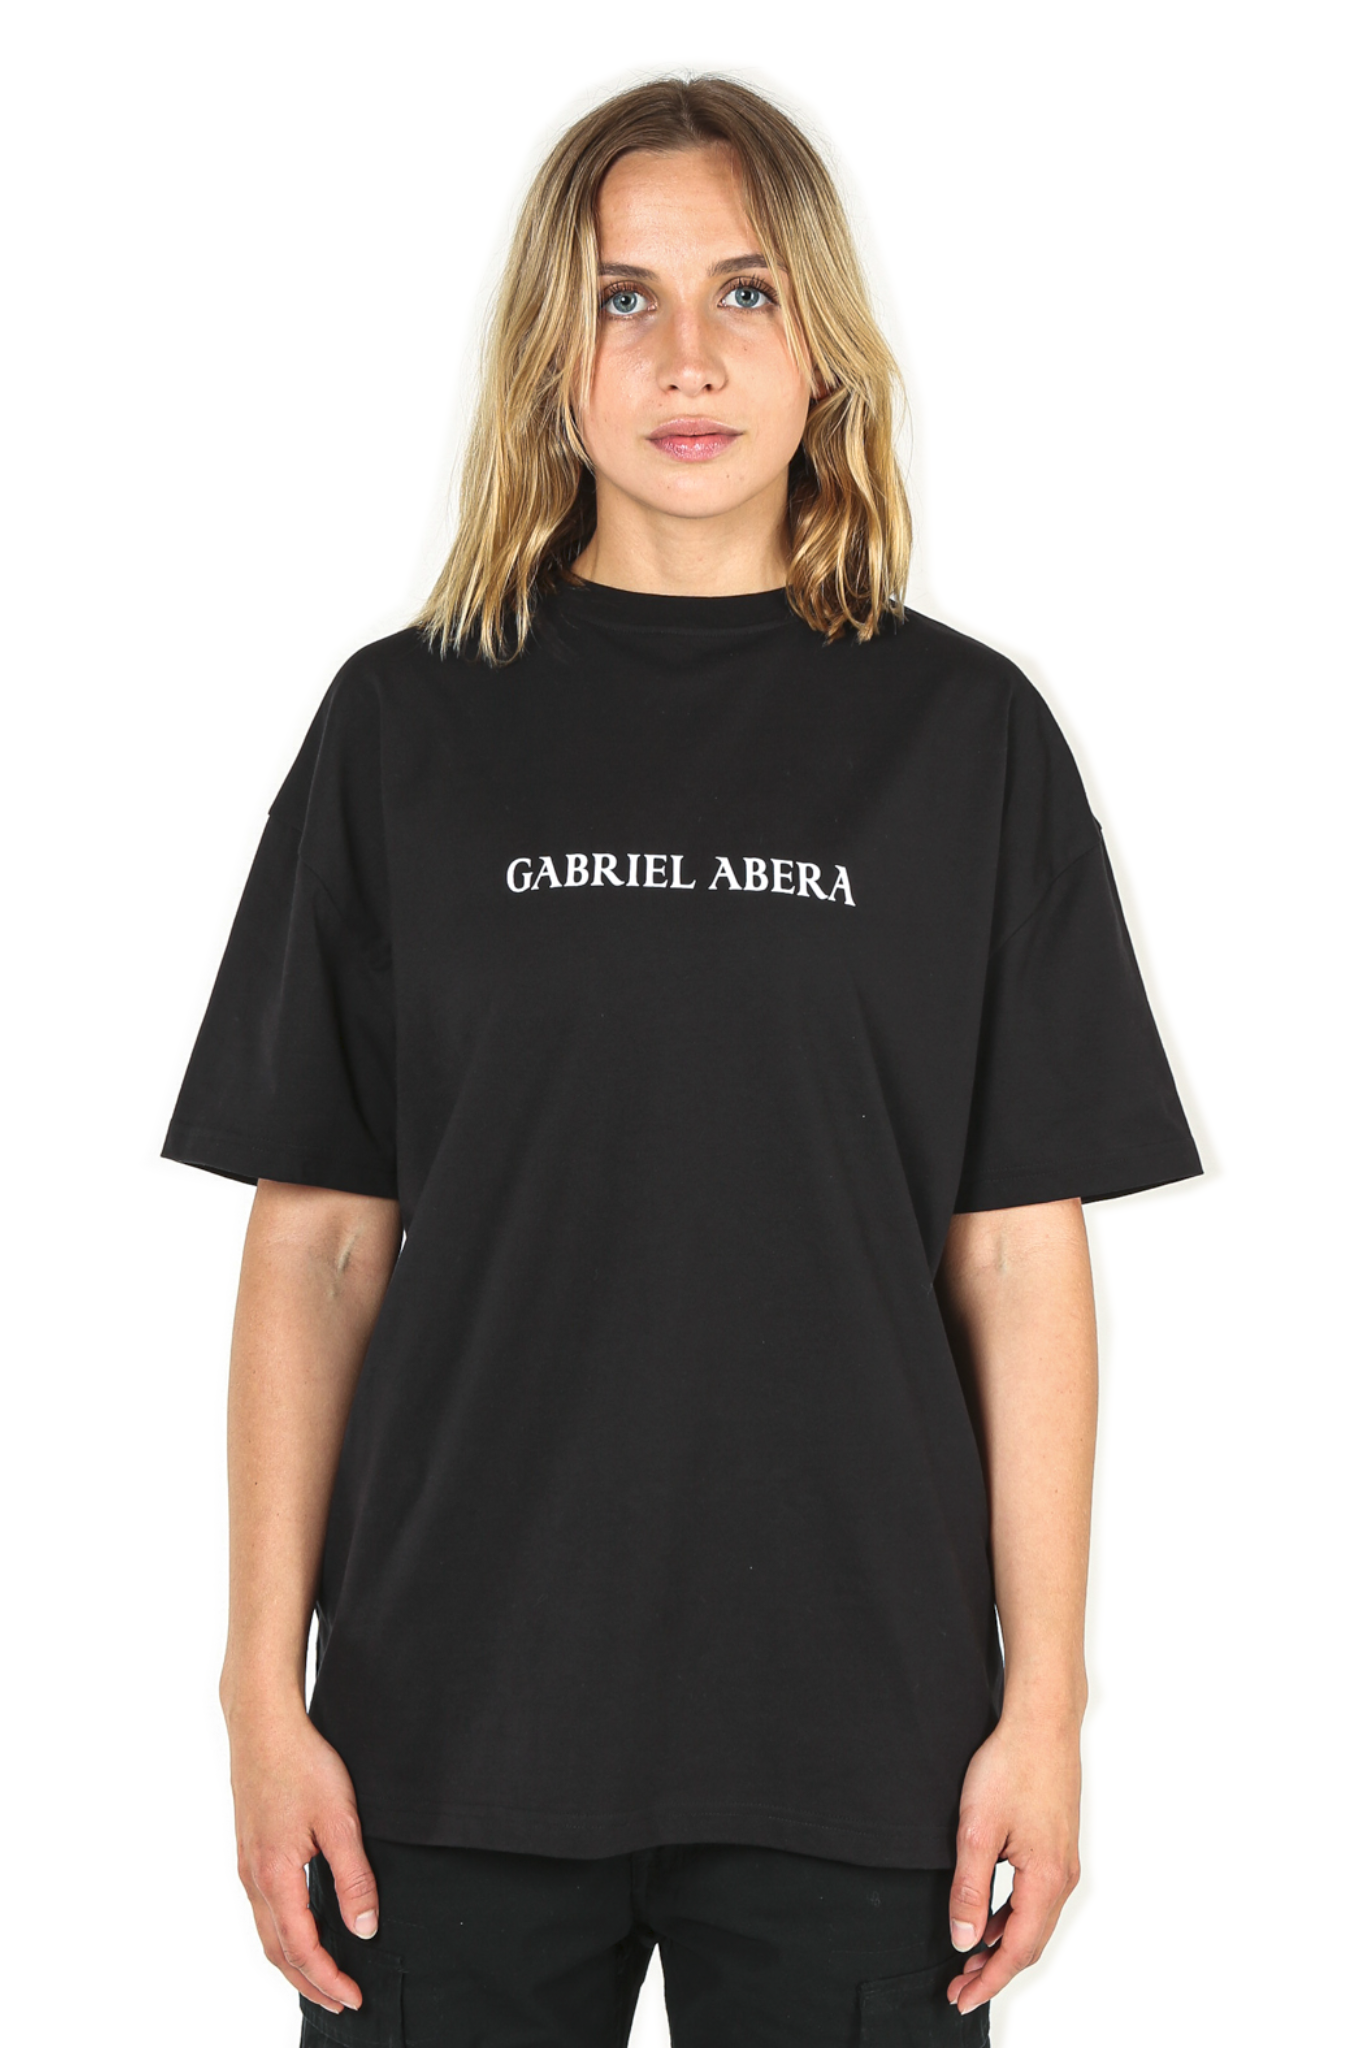 Basic Black T-Shirt with Brandname on Chest, Streetwear Label, Oversize, GABRIEL ABERA, High Quality, 100% Cotton, Tee for Men and Women